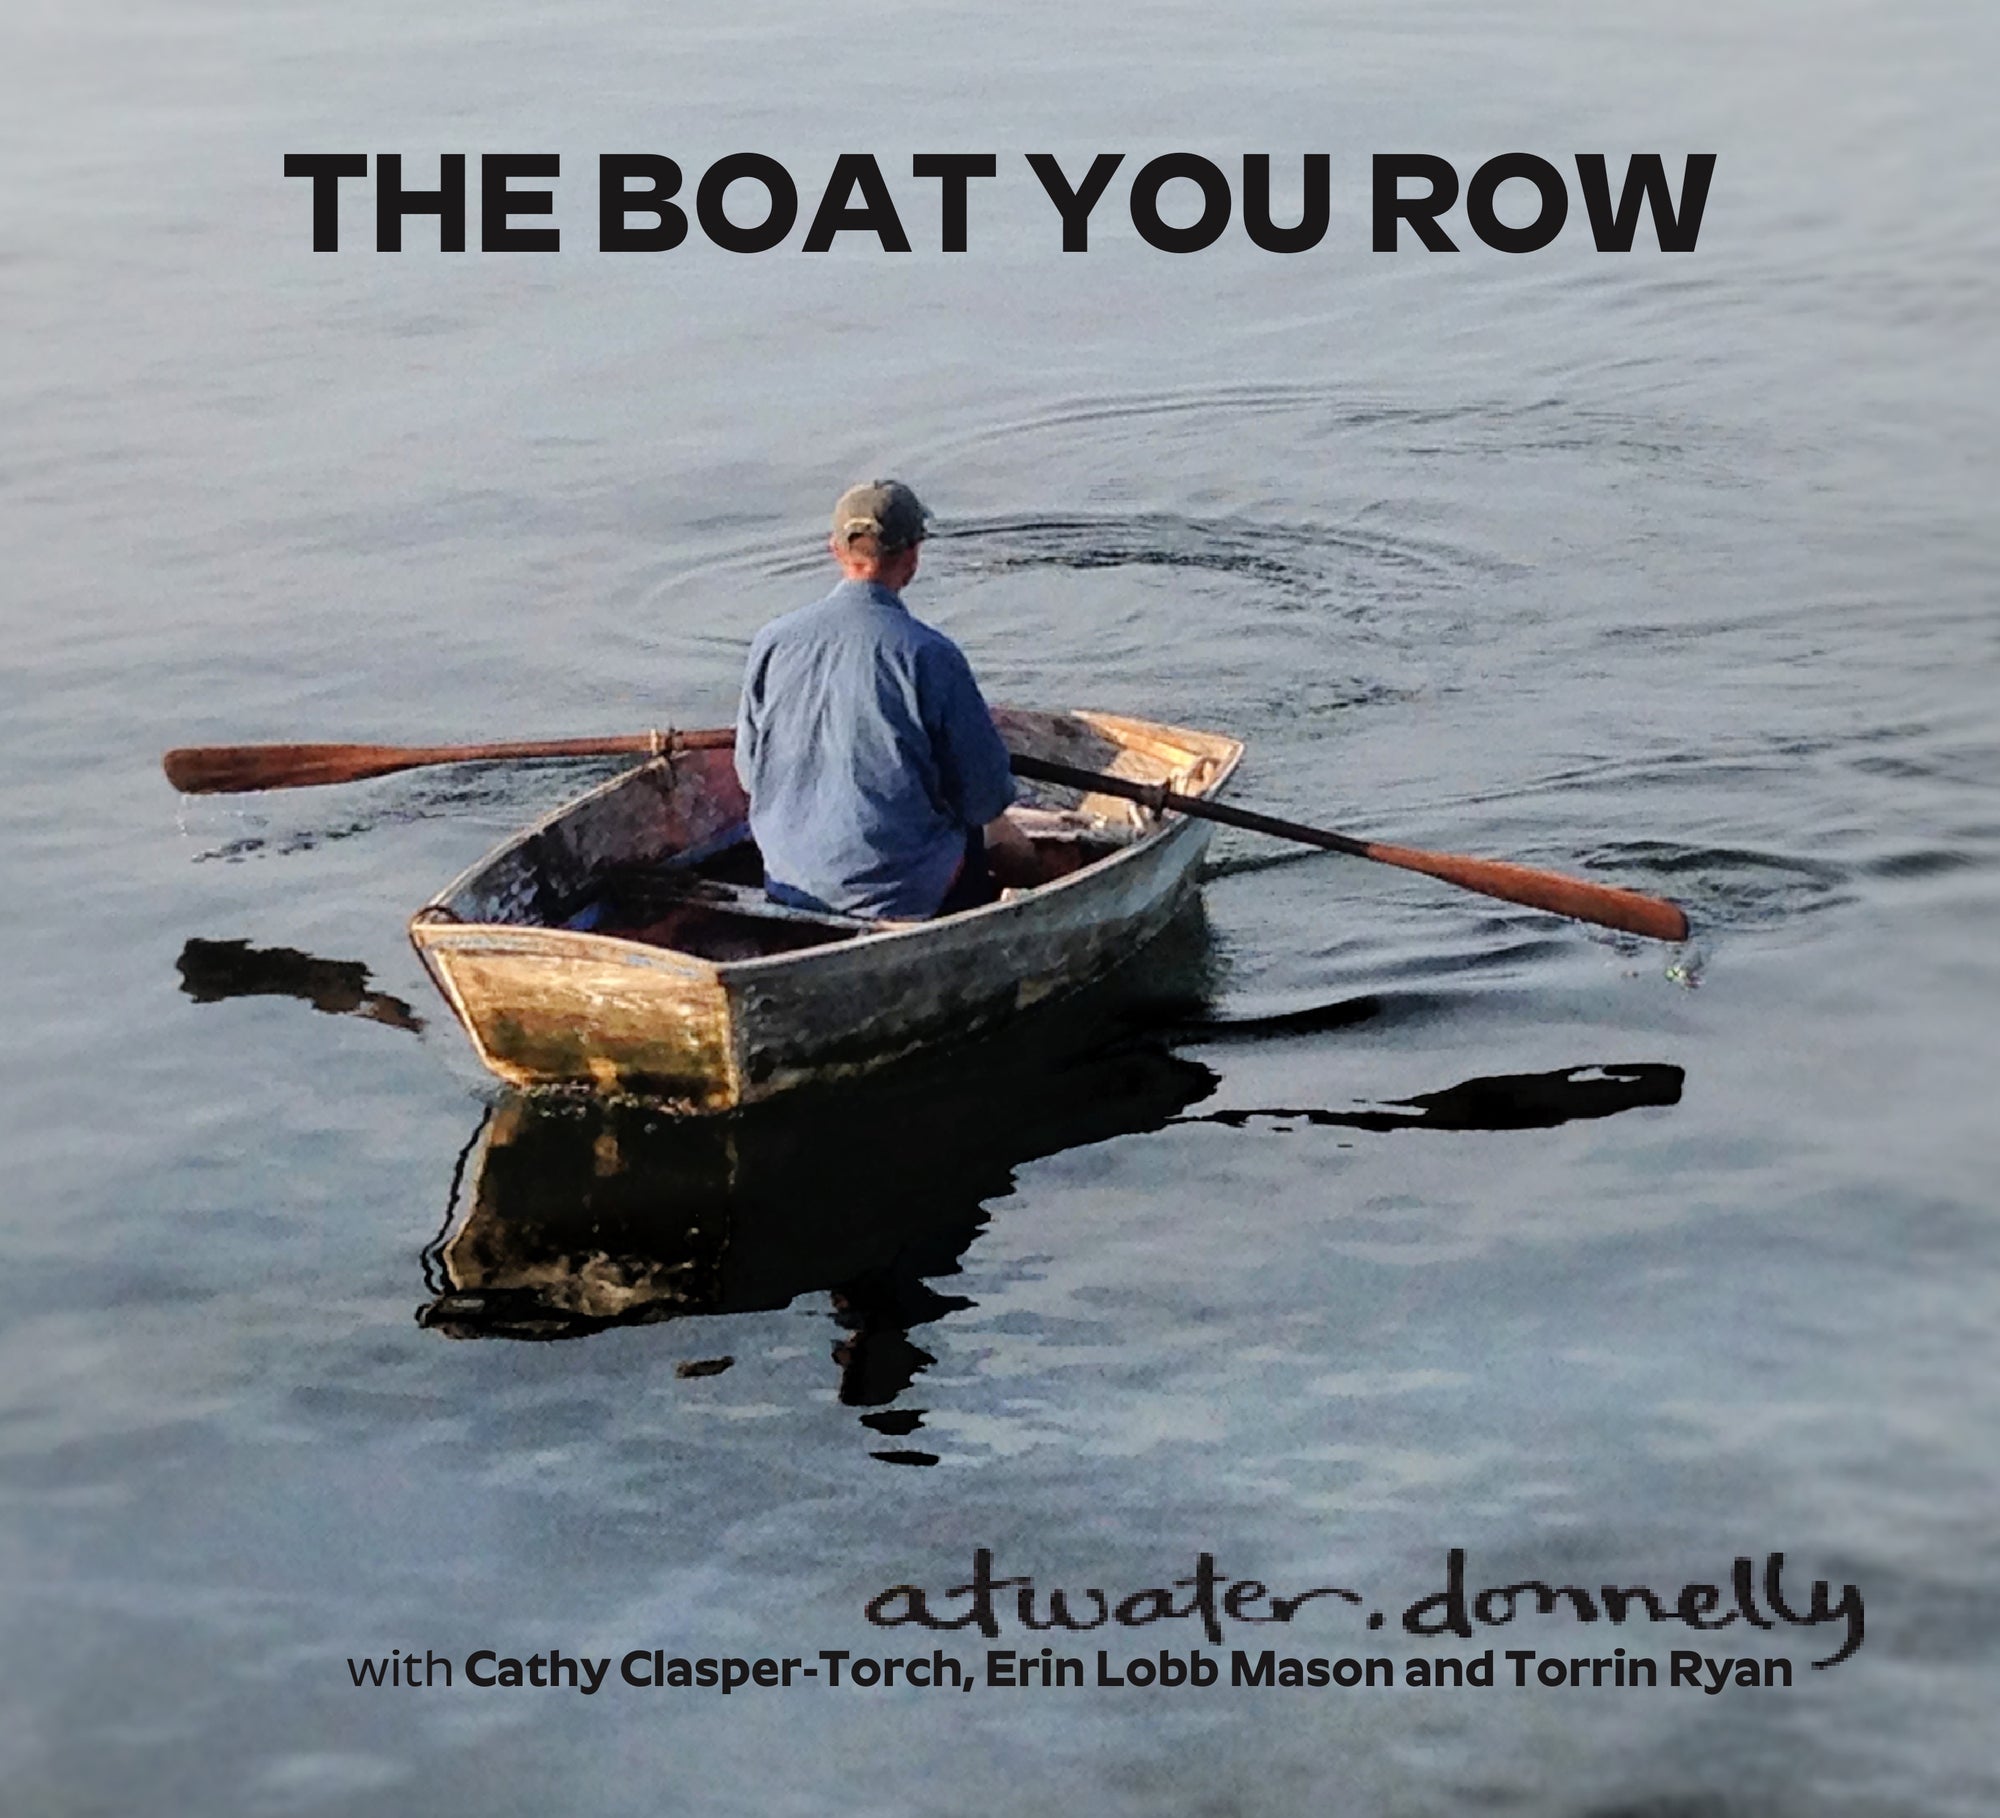 Sentence with product name: Man rowing a small boat on calm water, with text overlay: "The Boat You Row by Aubrey Atwater CD with Cathy Clasper-Torch, Erin Lobb Mason, and Torrin Ryan